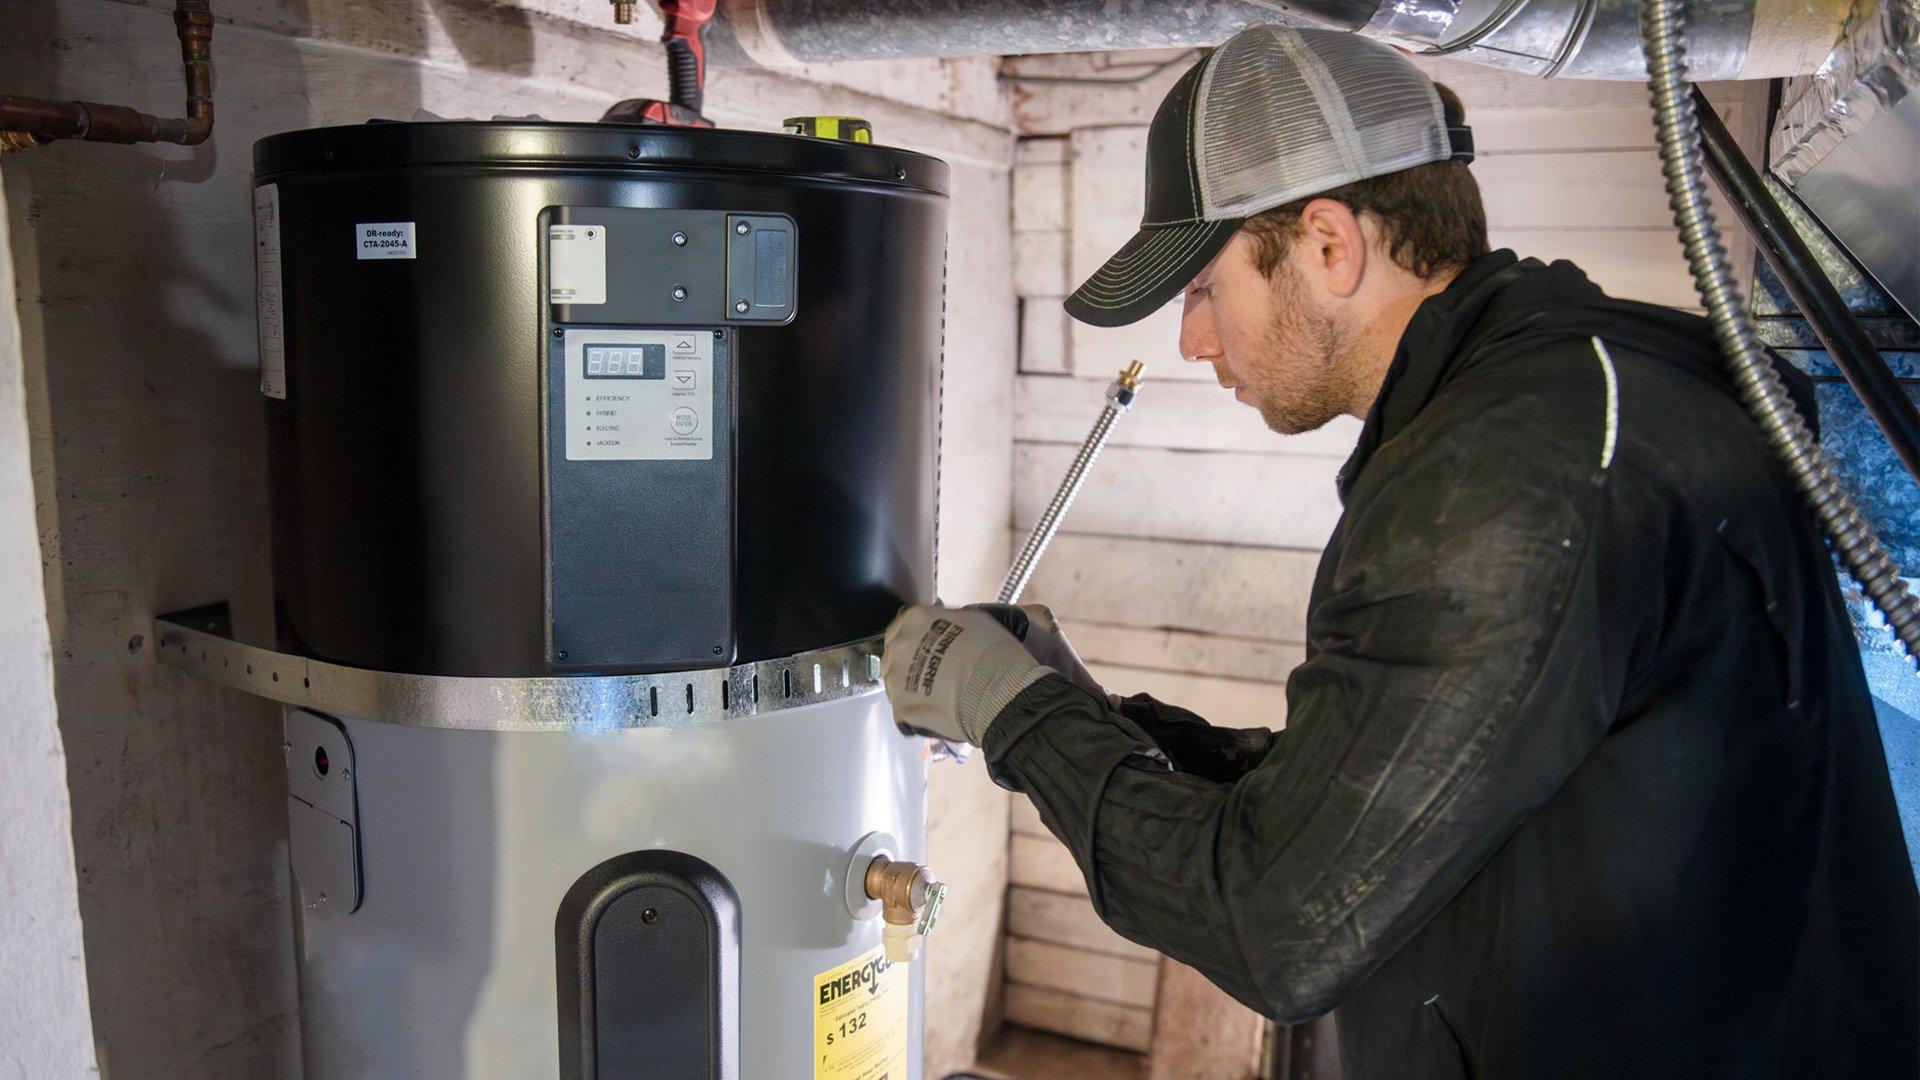 A professional plumber installs an ENERGY STAR water heater in a basement in this photo courtesy of Hot Water Solutions.